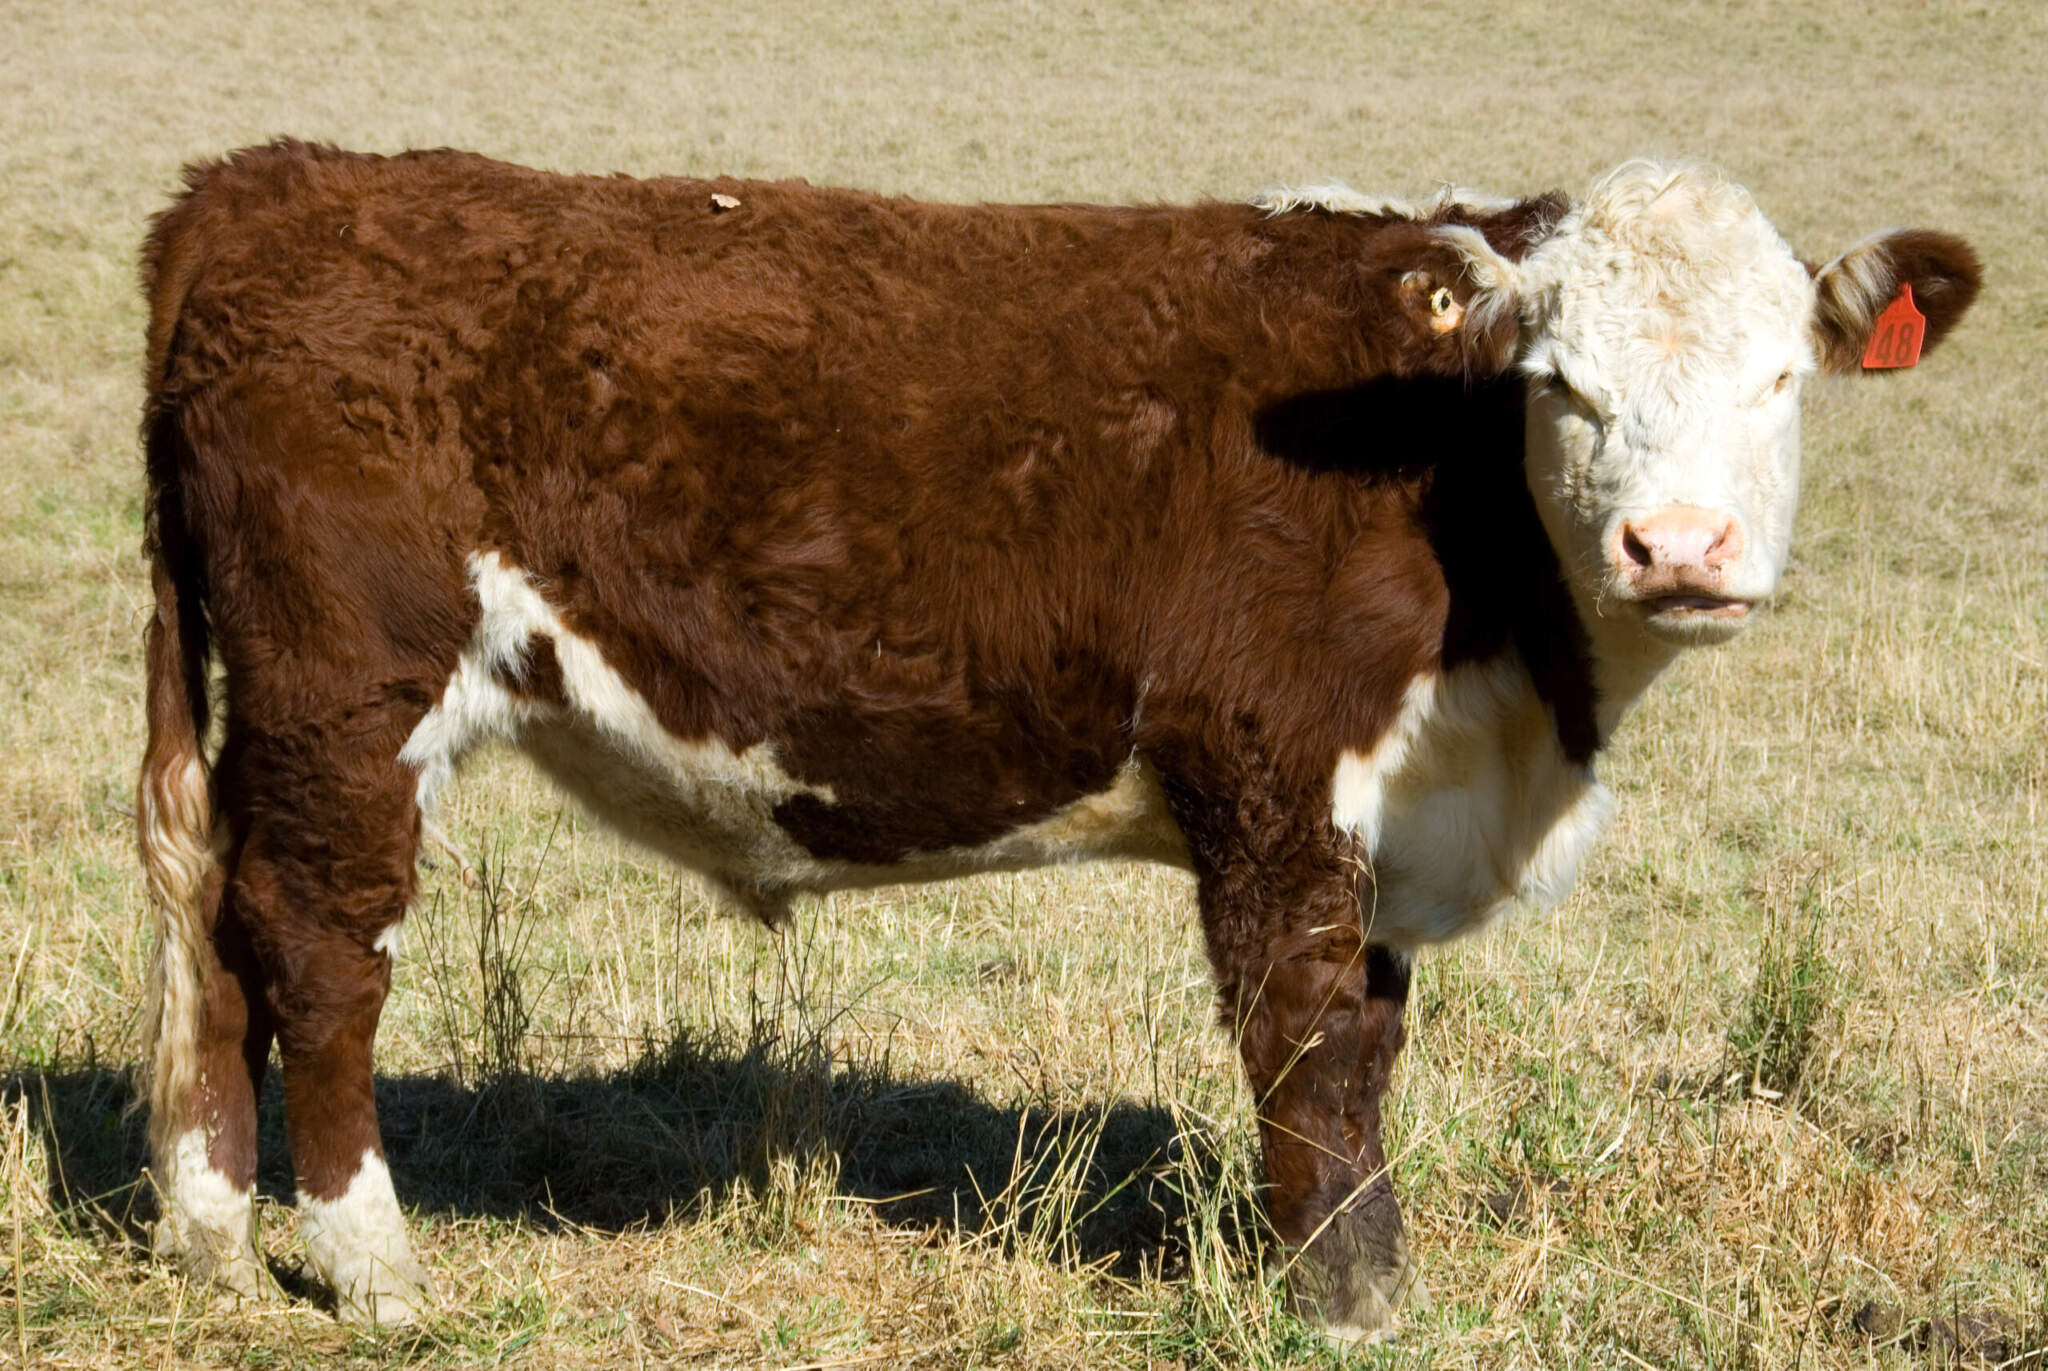 Cow Definition & Meaning - Merriam-Webster